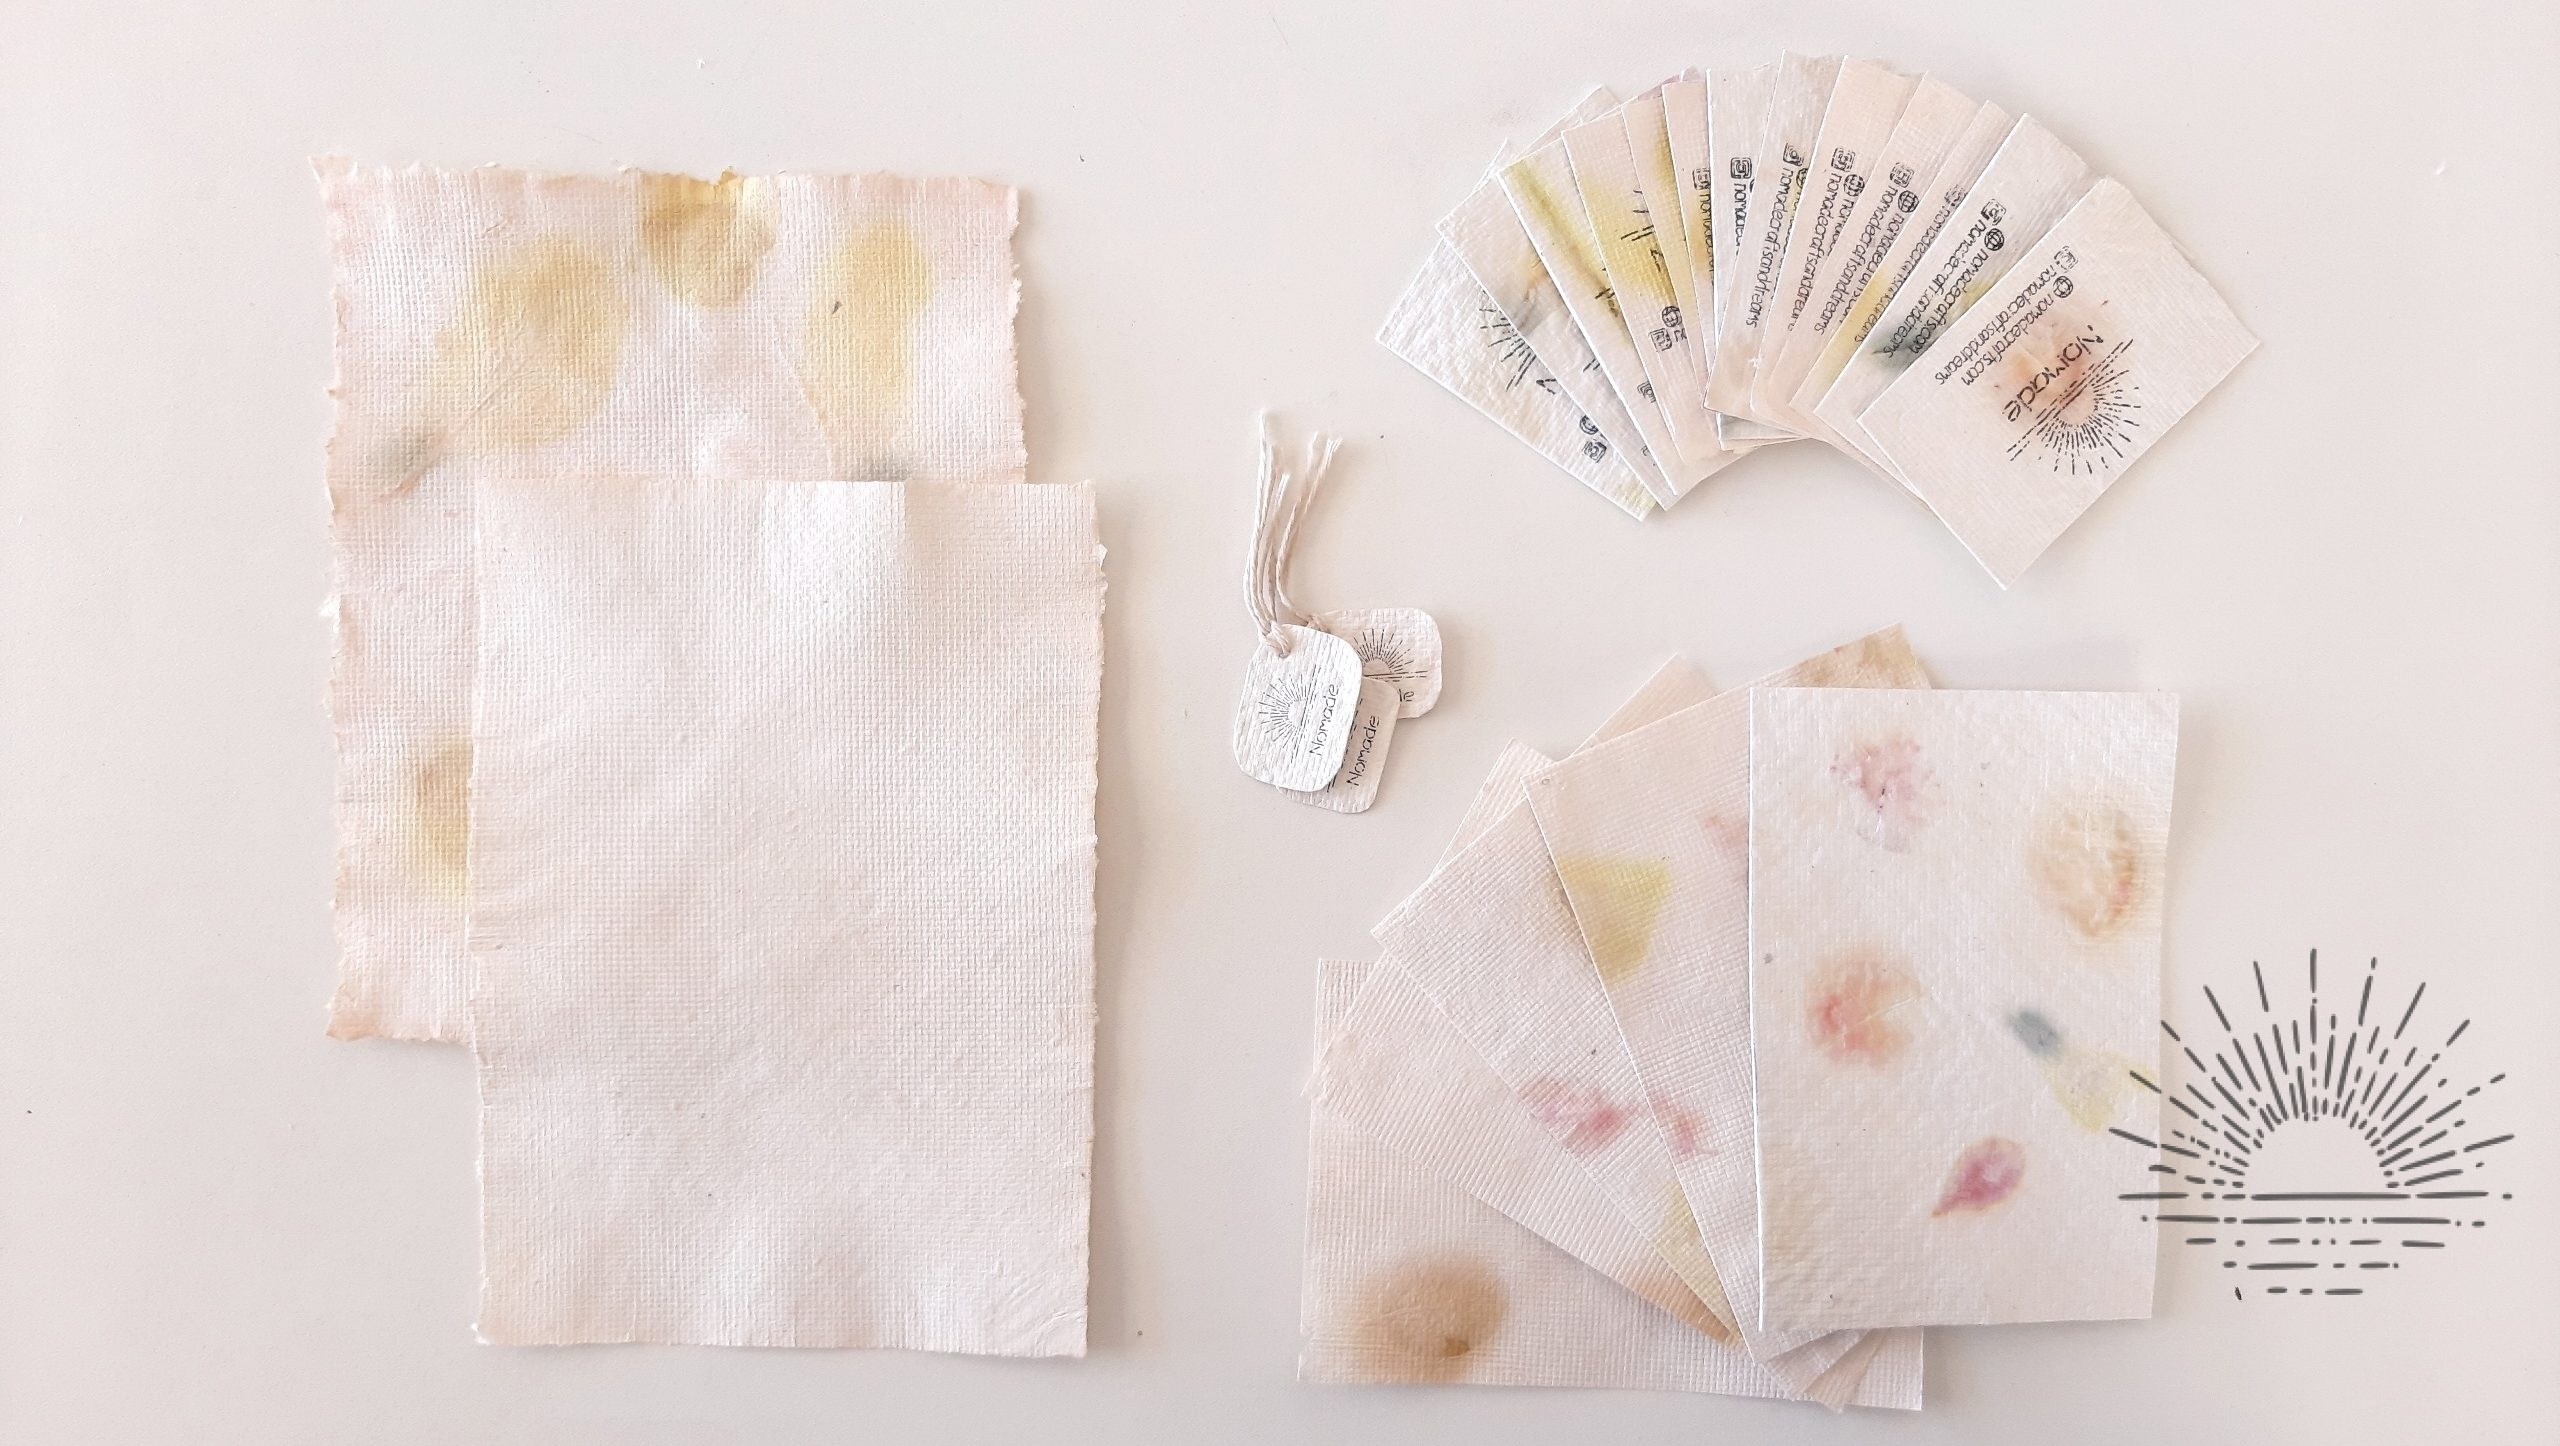 Recycled paper: how-to & project ideas